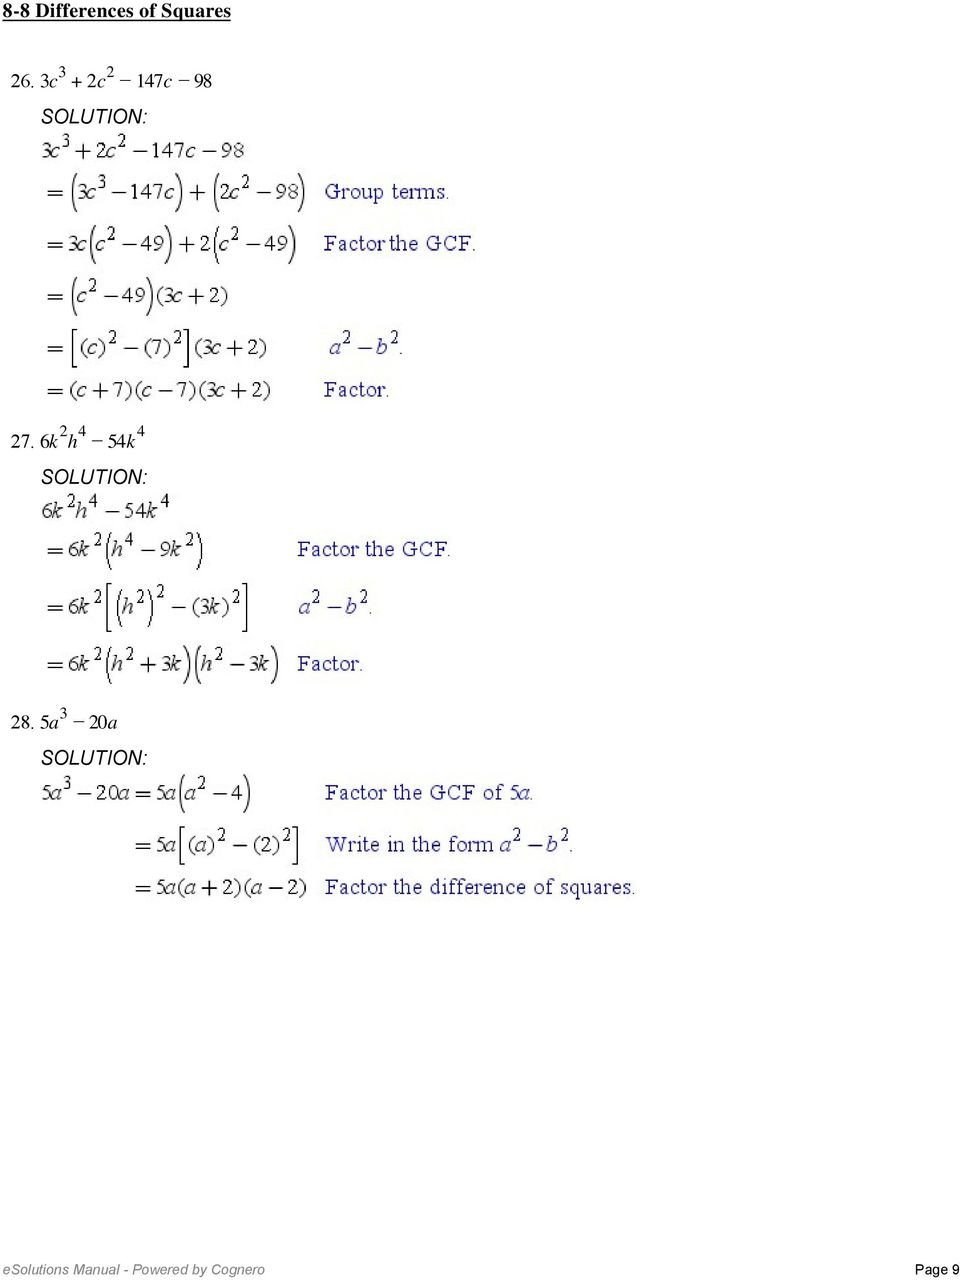 Factoring Difference Of Squares Worksheet 8 8 Differences Of Squares Factor Each Polynomial 1 X 9